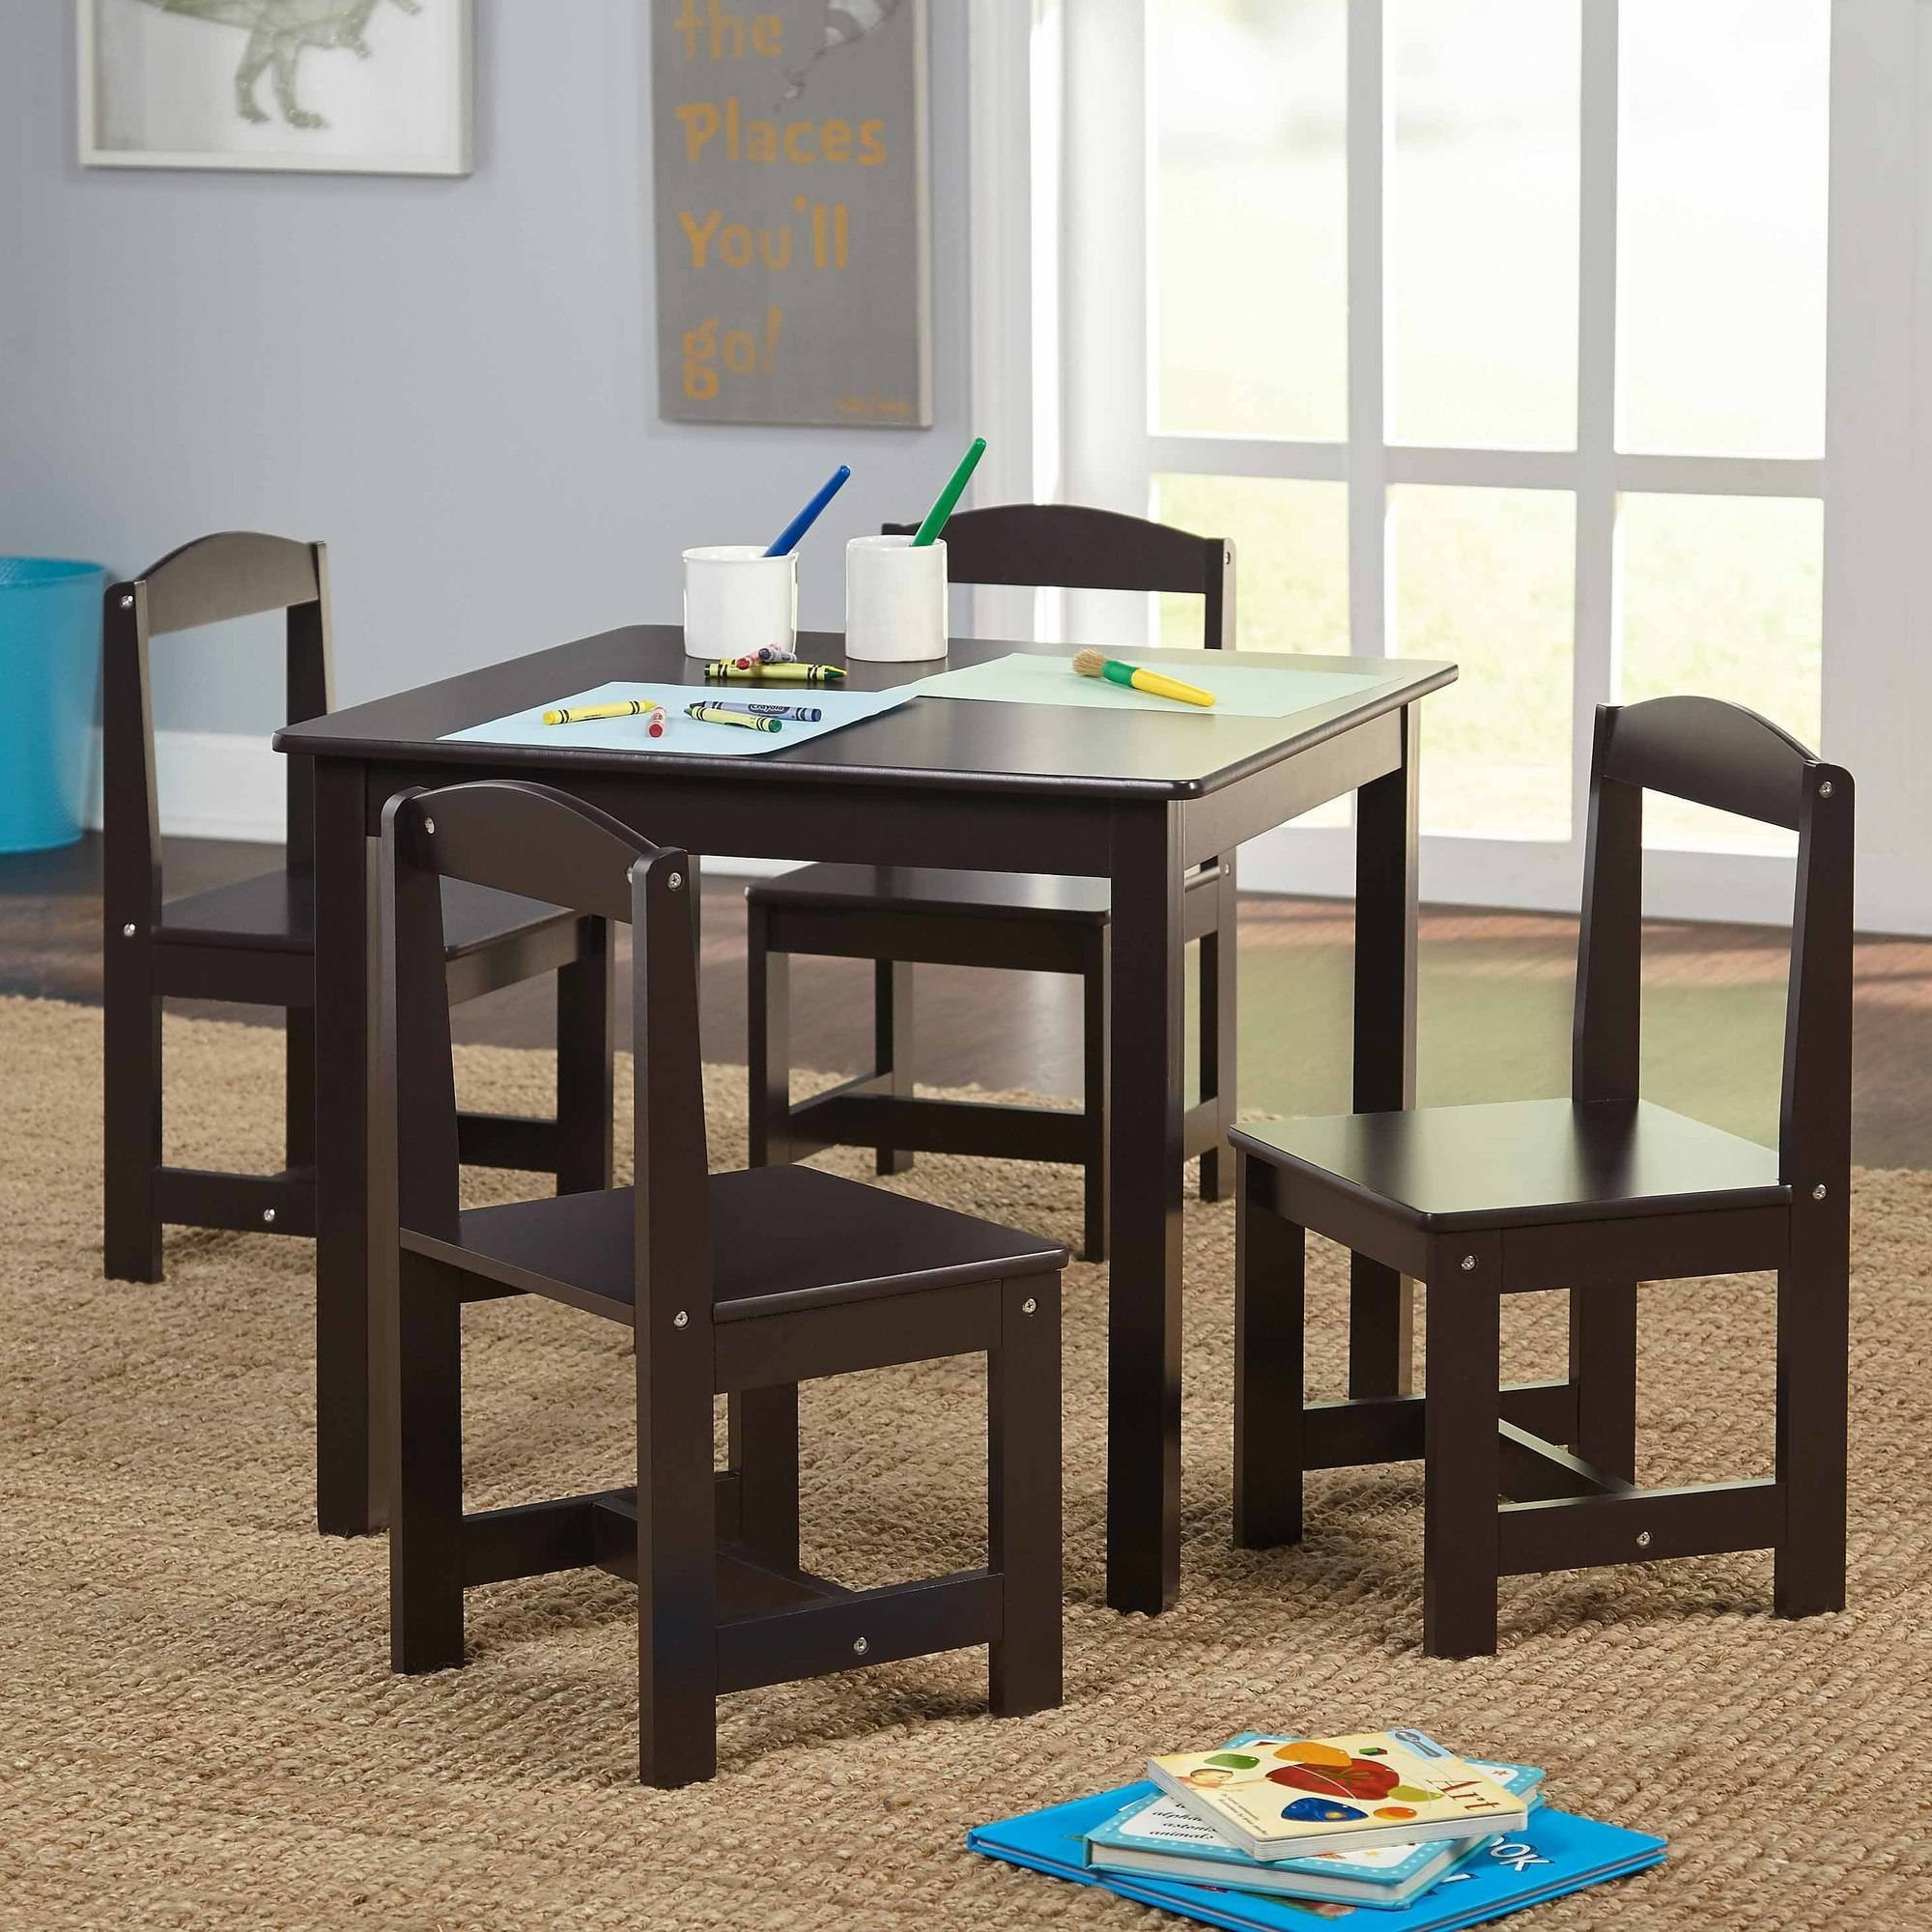 Kids Table And Chairs Walmart
 Hayden Kids 5 Piece Table and Chairs Set Toddler Wood